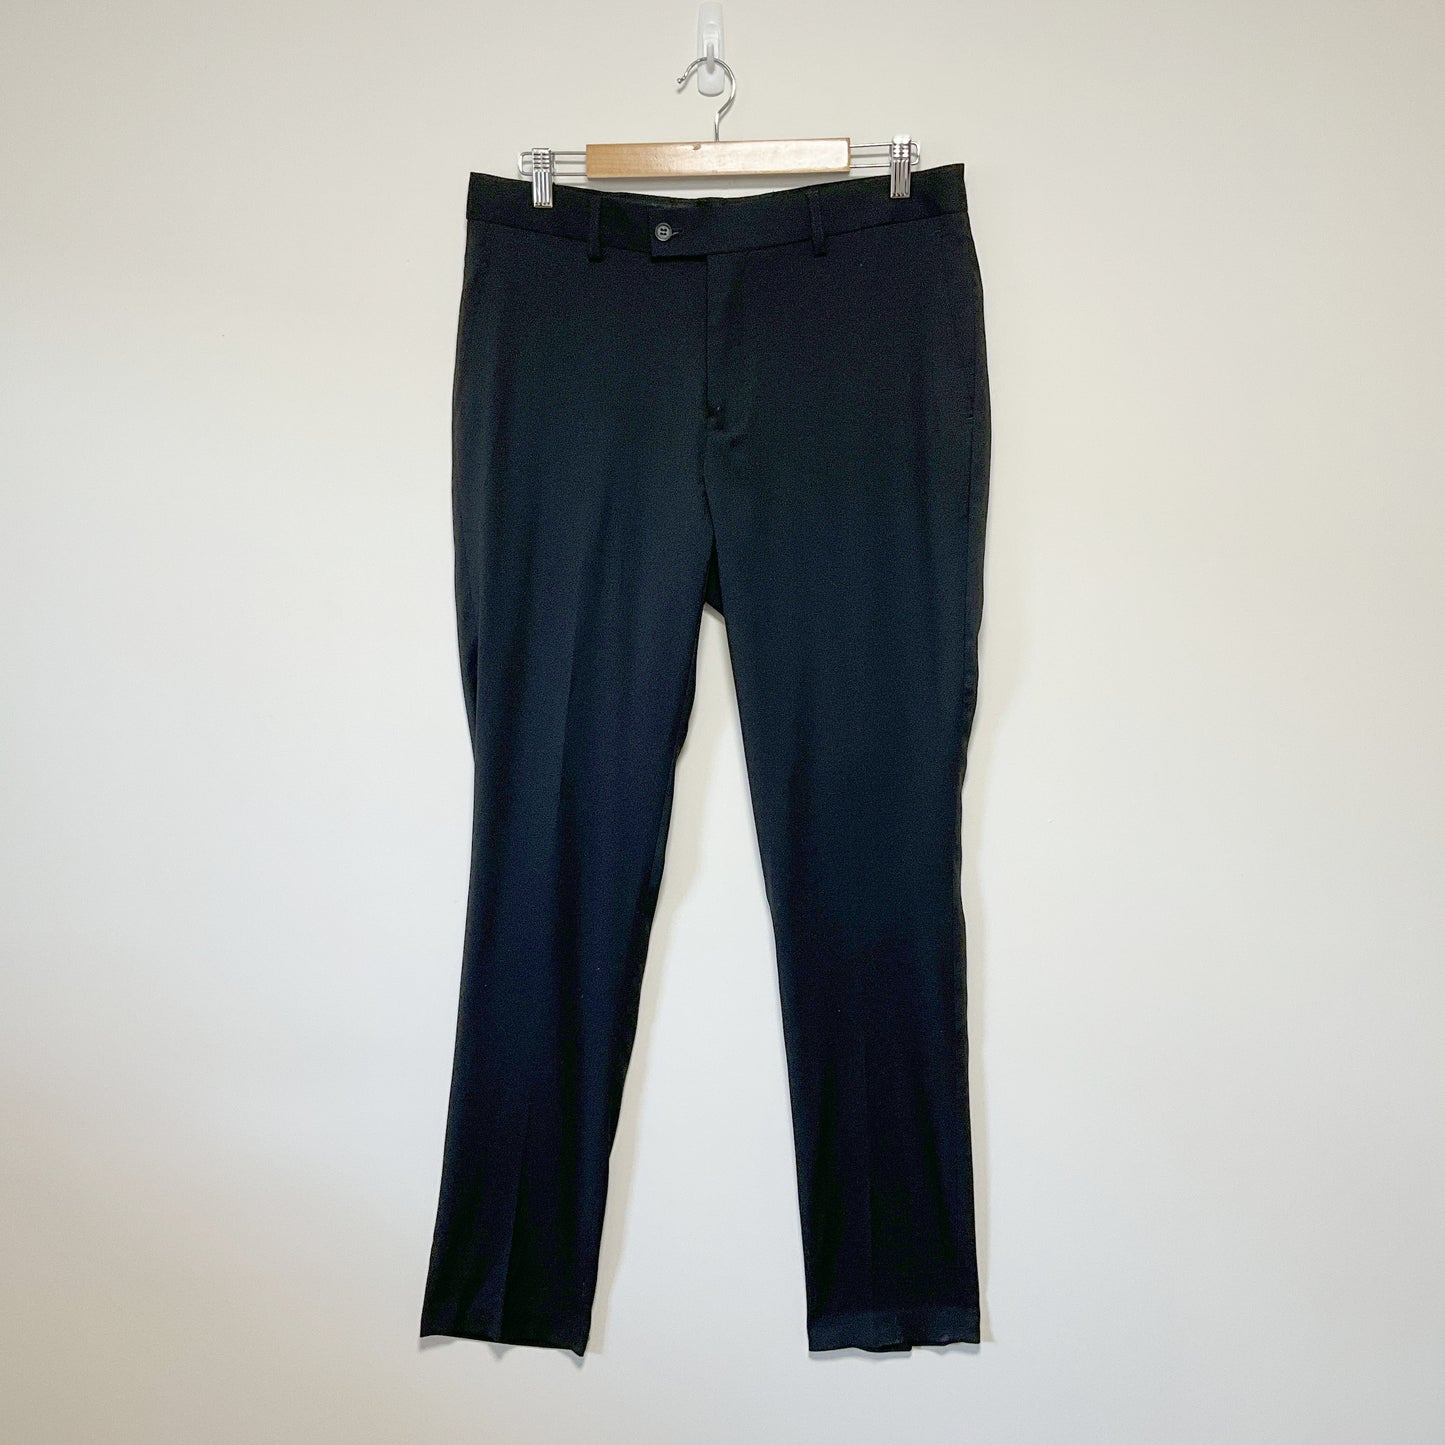 Hallenstein Brothers - PV STR Clim Core Trousers